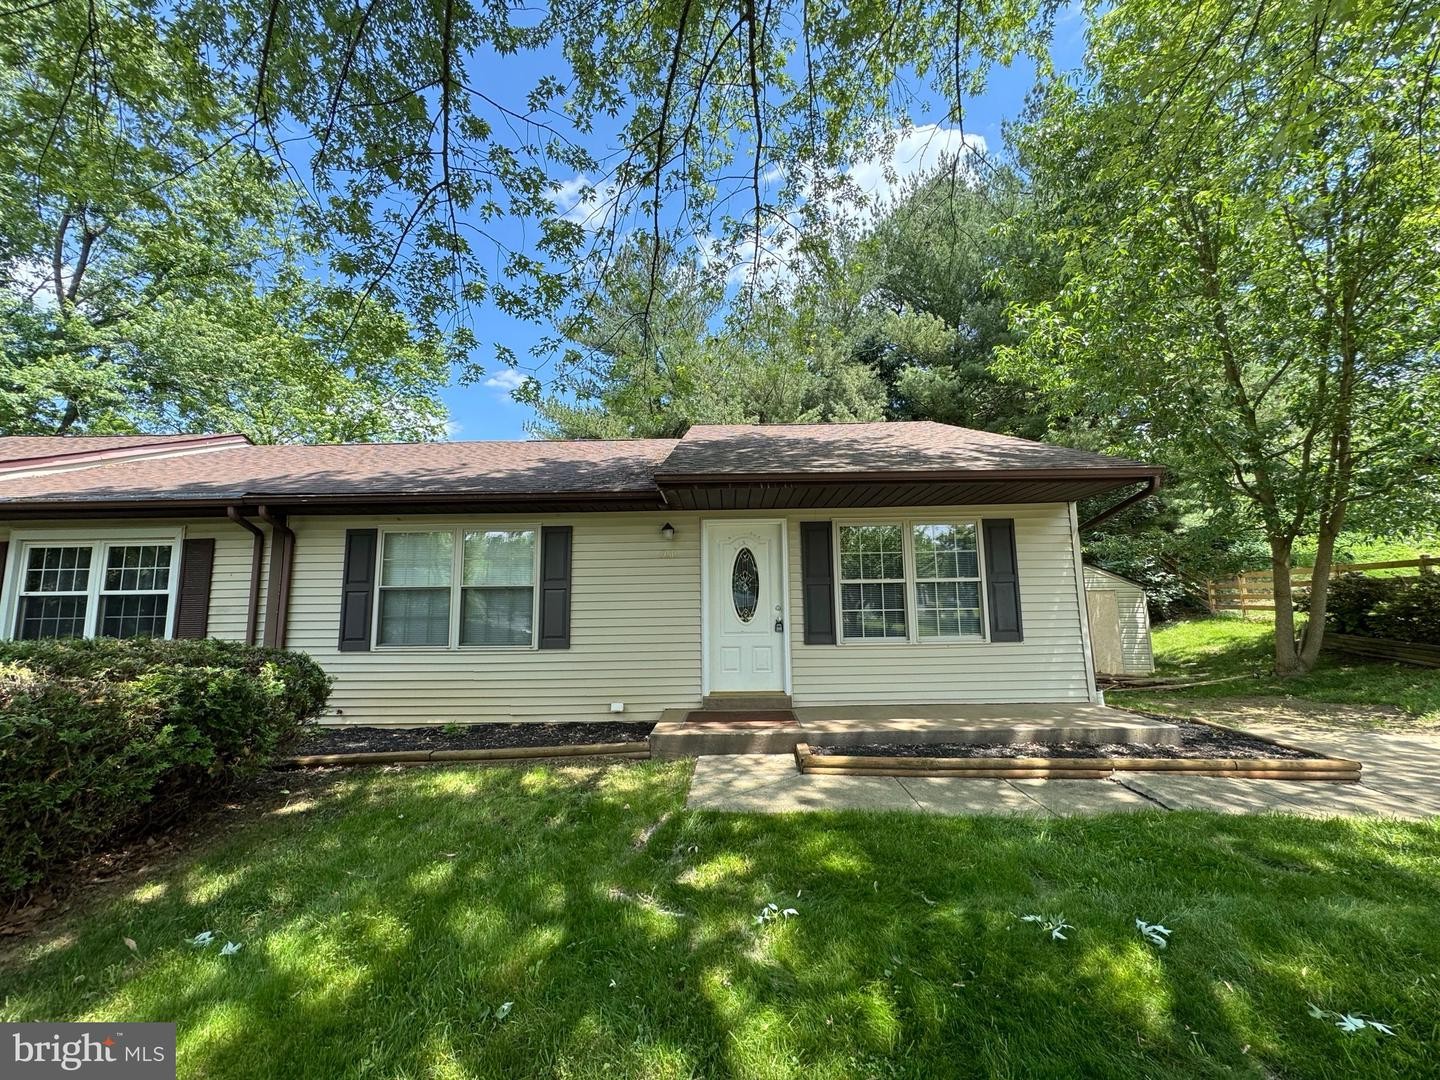 1. 950 Ruby Dr